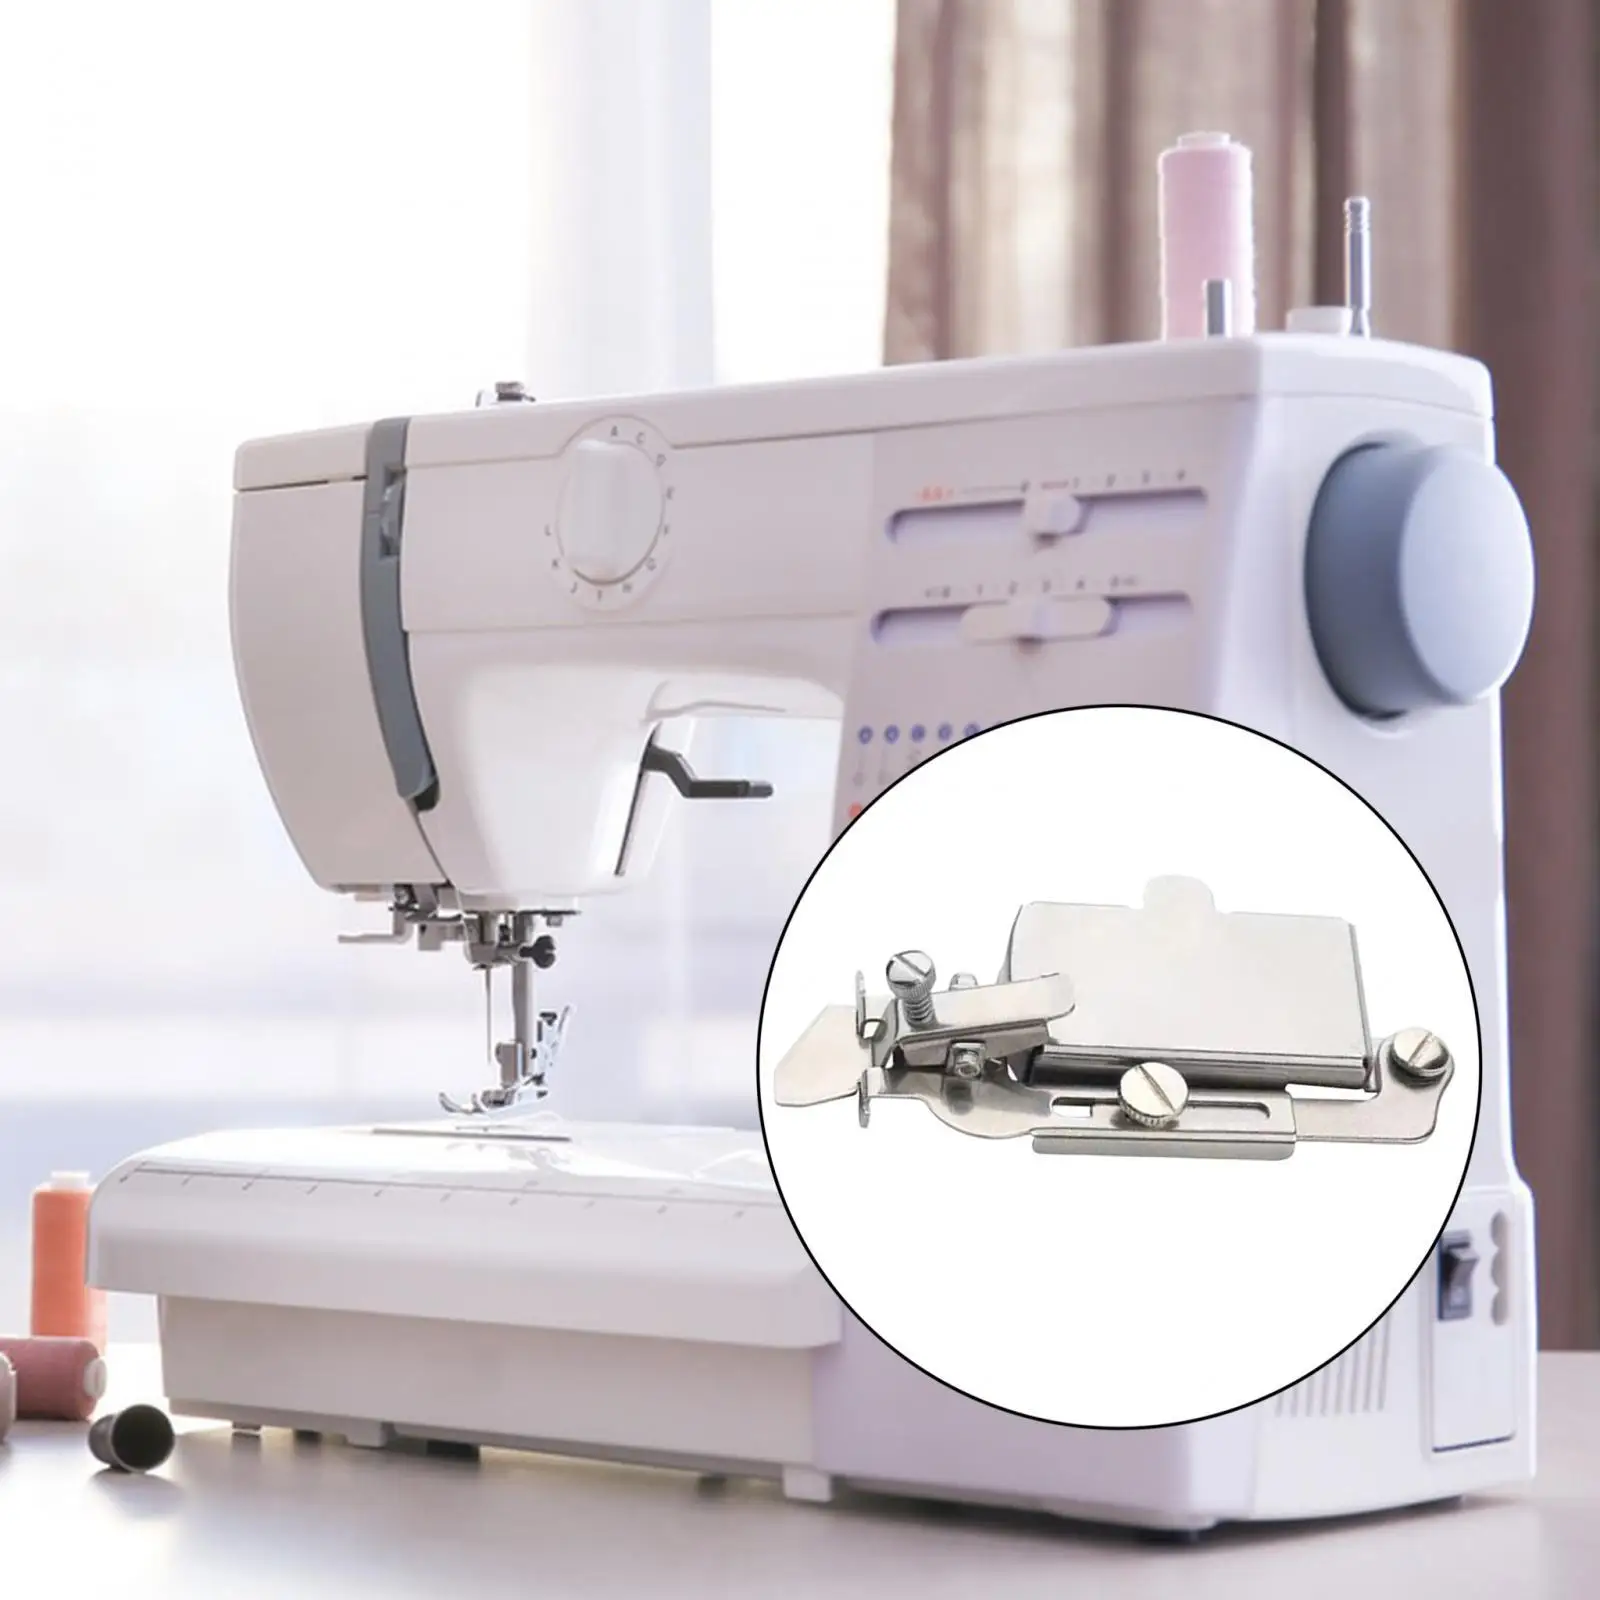 Sewing Machine Seam Guide Portable Stainless Steel Replace Crafts Equipment Gauge Presser for Household Sewing Machine Beginner